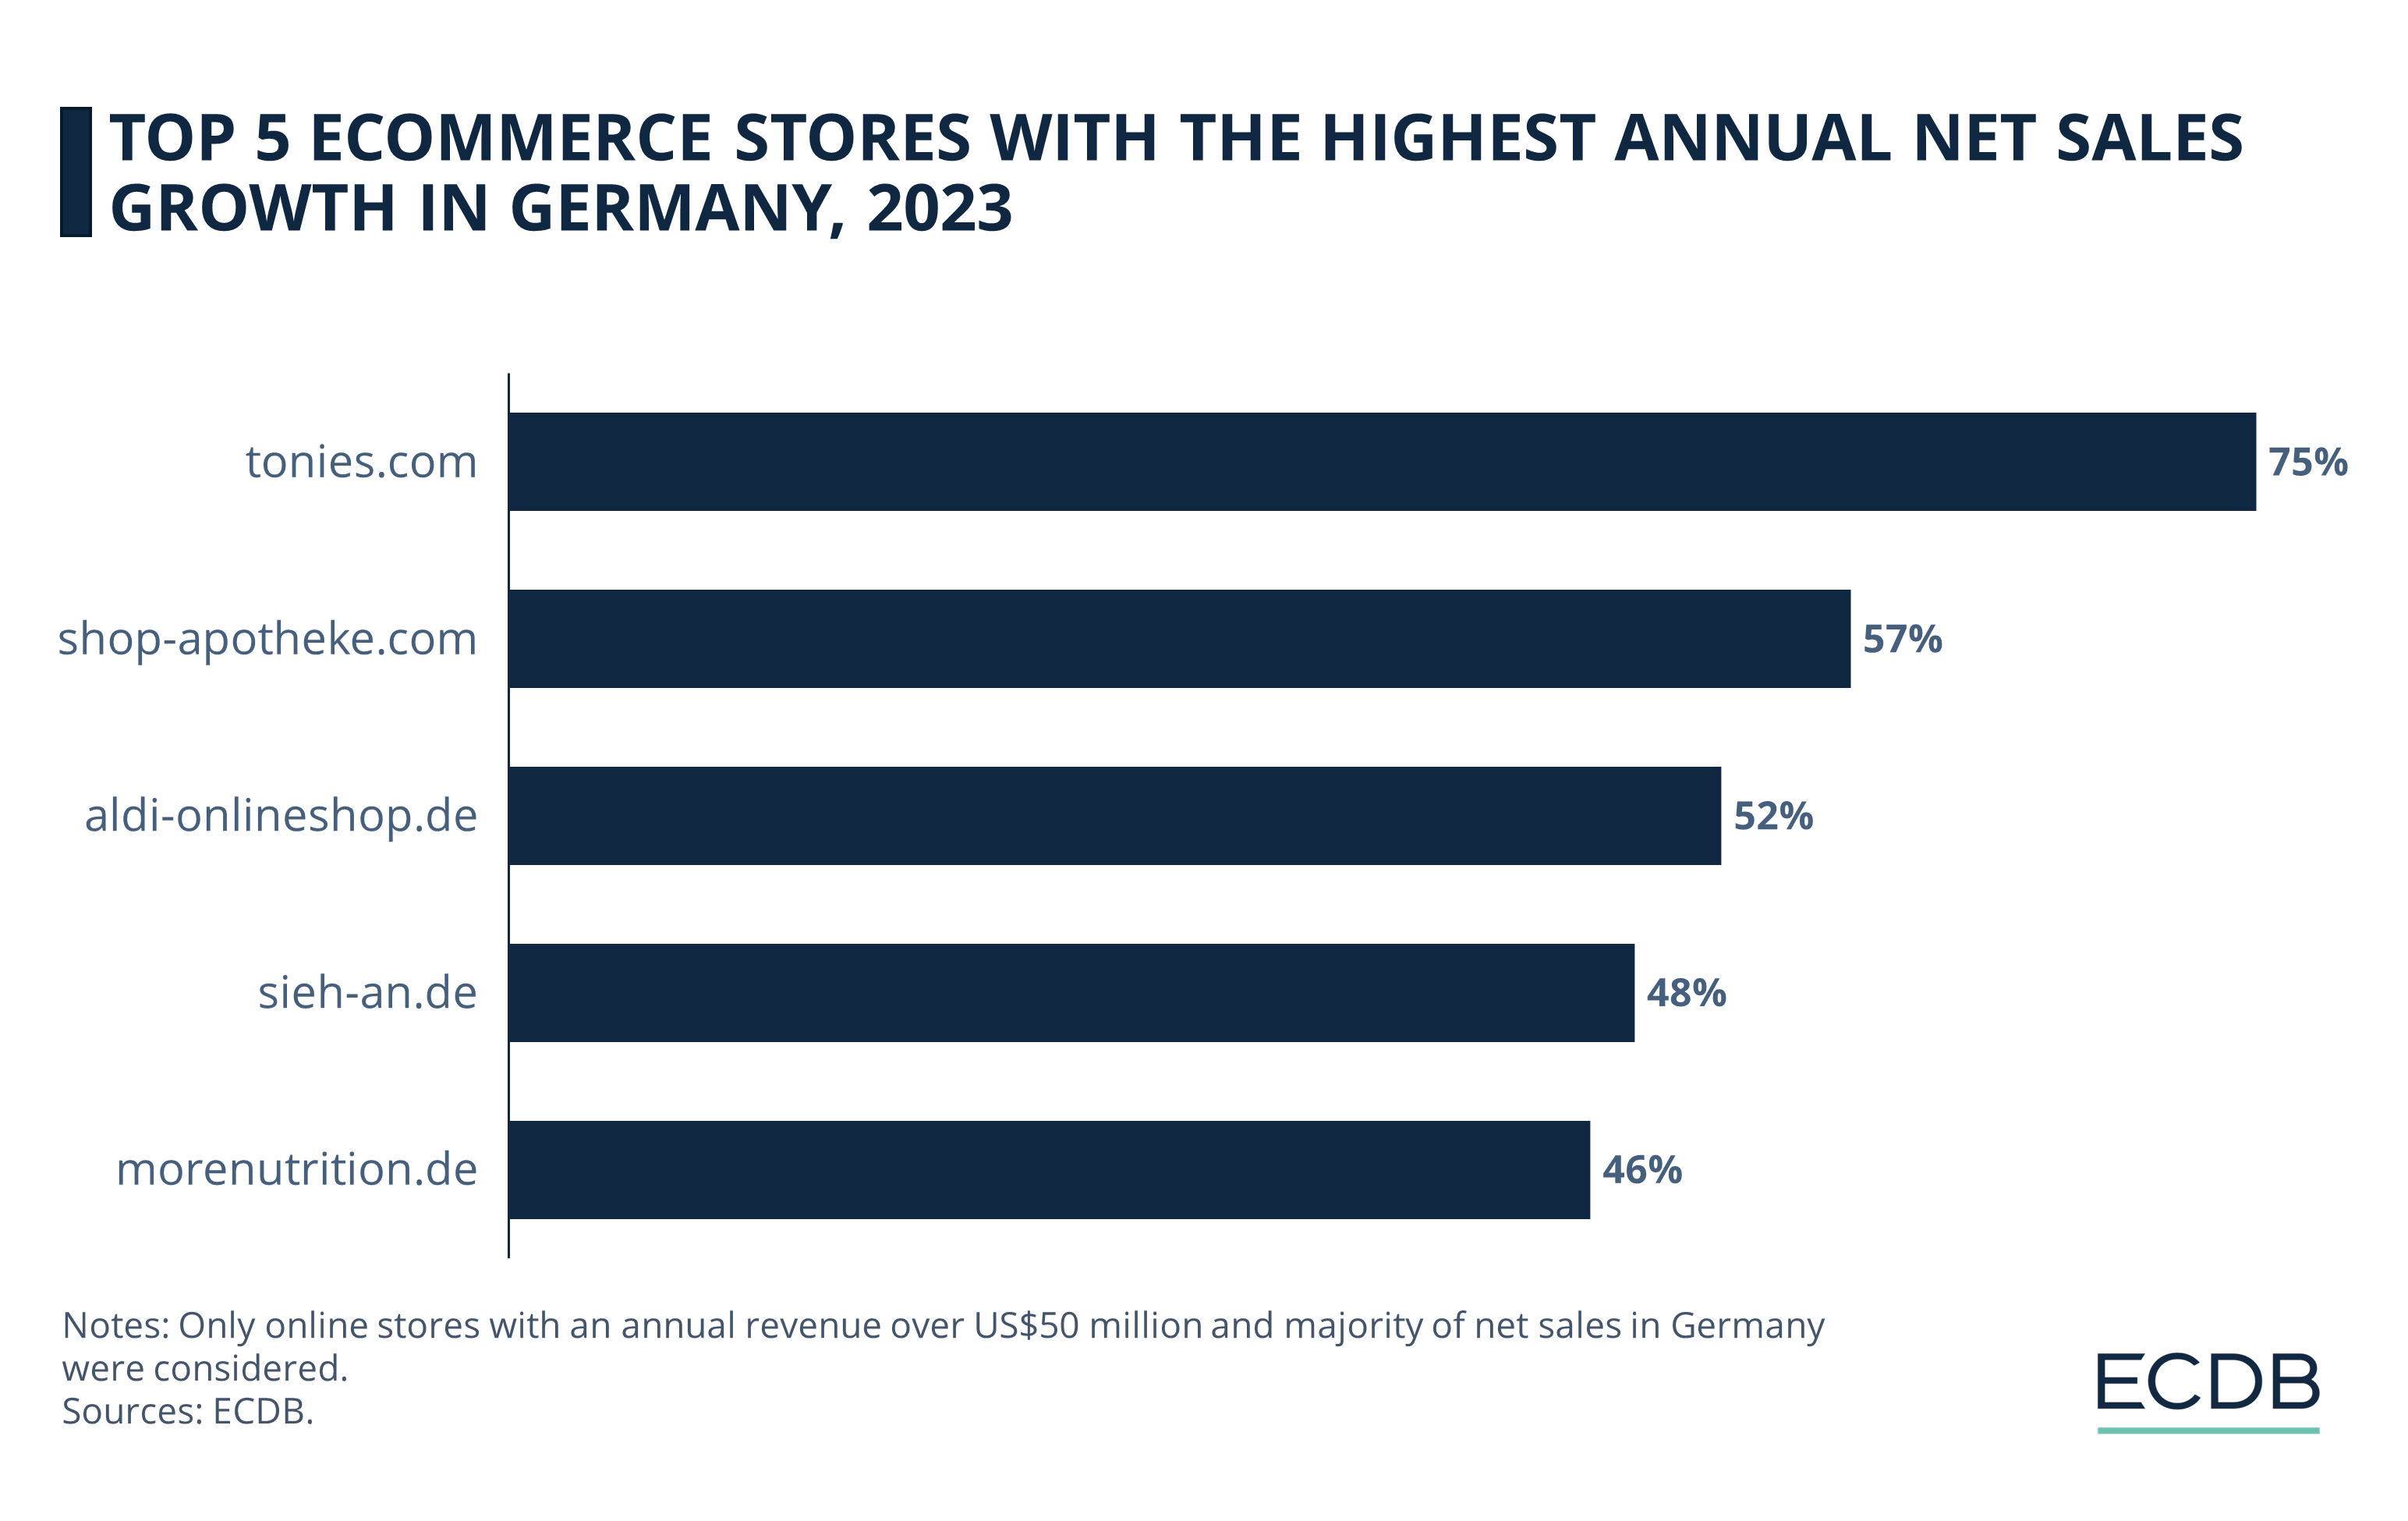 Top 5 eCommerce Stores With the Highest Annual Net Sales Growth in Germany, 2023